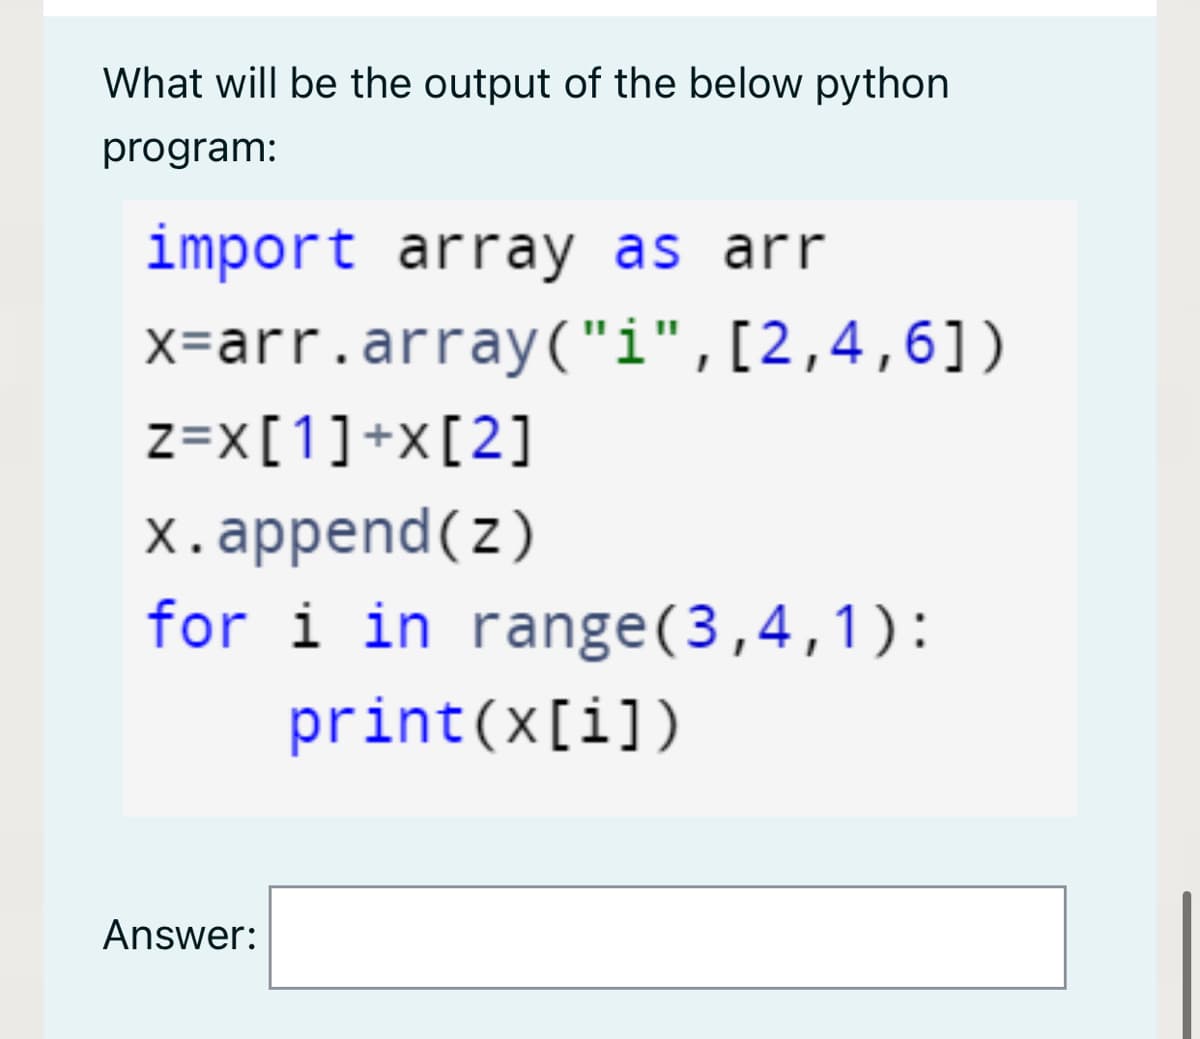 What will be the output of the below python
program:
import array as arr
x=arr.array("i",[2,4,6])
z=x[1]+x[2]
x.append(z)
for i in range(3,4,1):
print(x[i])
Answer:
